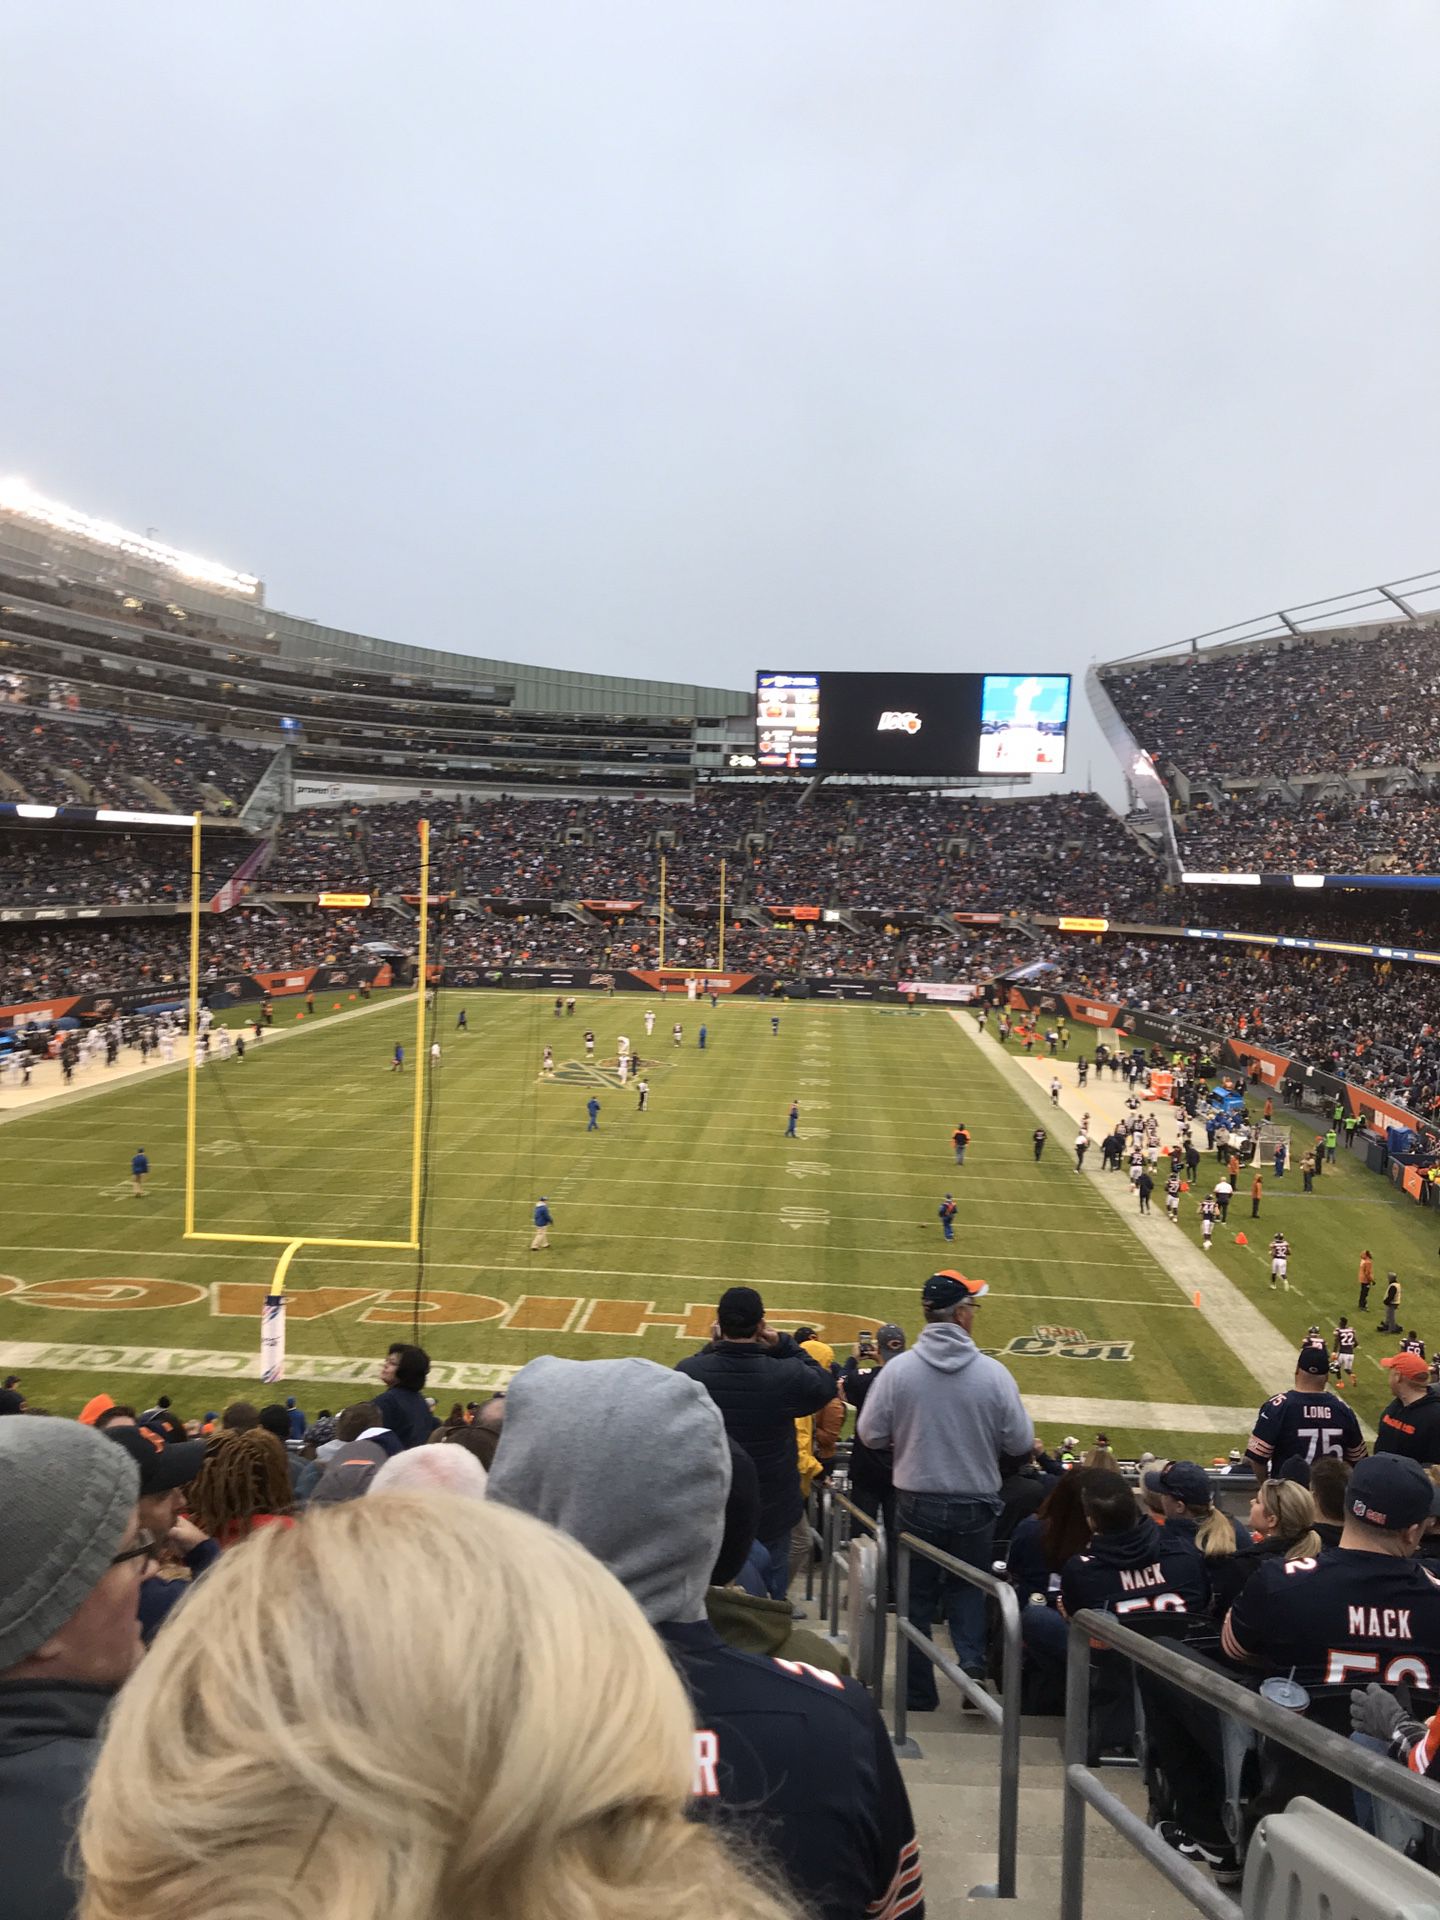 Bears Giants tickets SEC 251 row 13 2 seats total and south parking